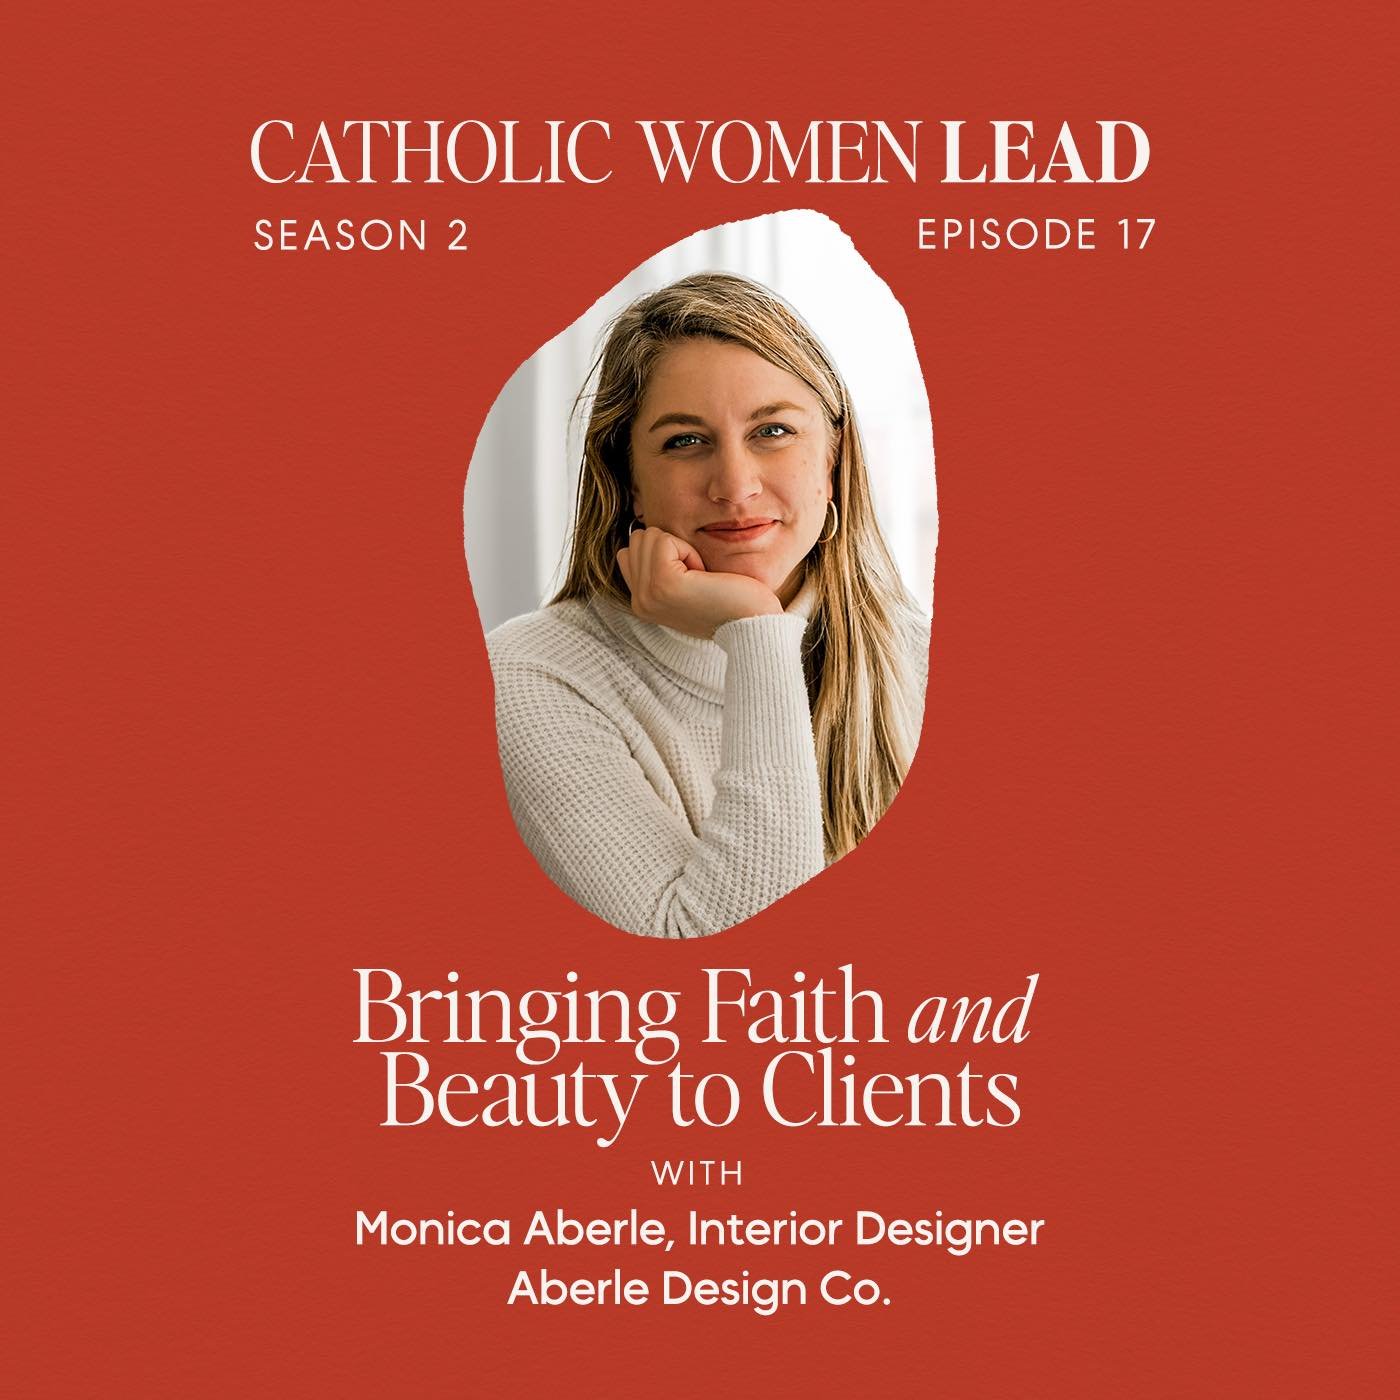 In our recent episode of our podcast, Catholic Women Lead, CWIB co-president and editor-in-chief Taryn DeLong talks with Monica Aberle, founder of Aberle Design Co (formerly Everyday Mamas) about:

👉🏼 Her career journey and the pivots she&rsquo;s t